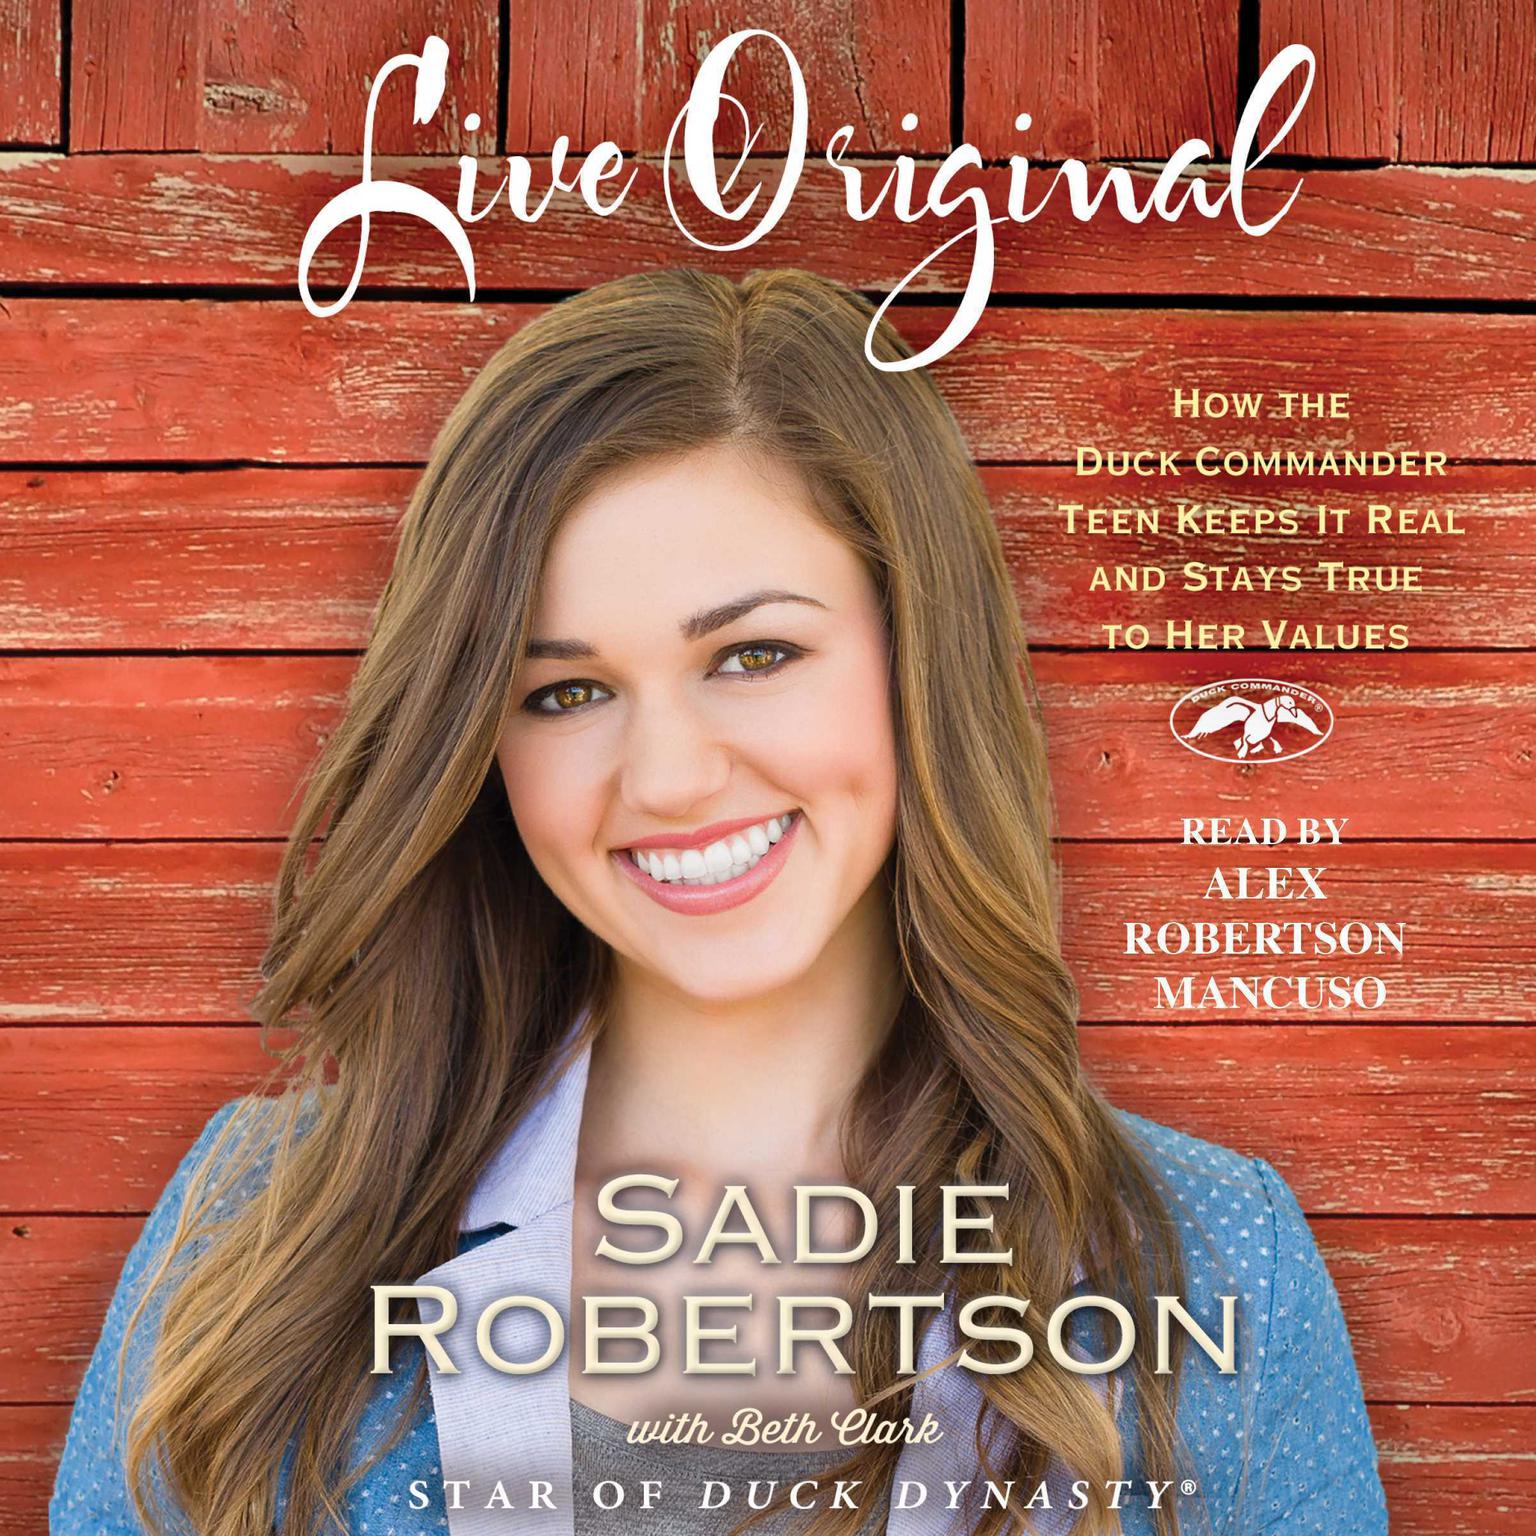 Live Original: How the Duck Commander Teen Keeps It Real and Stays True to Her Values Audiobook, by Sadie Robertson